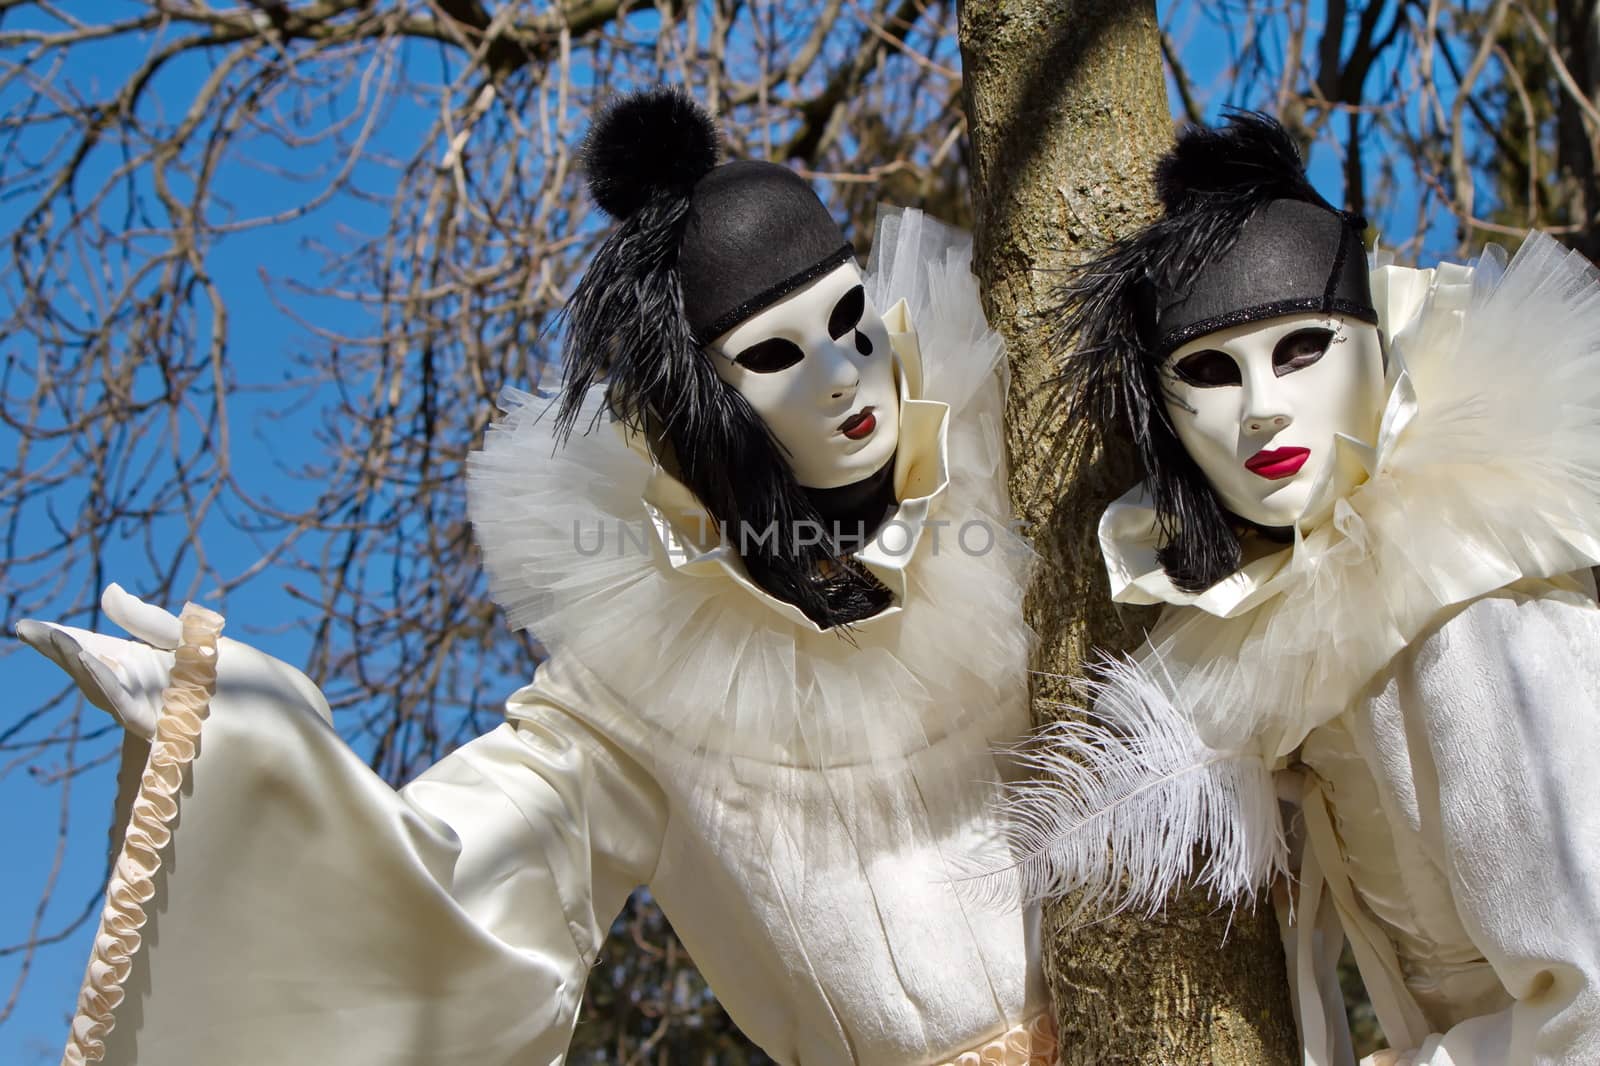 Black and white Pierrot couple at the 2014 Annecy venetian carnival, France